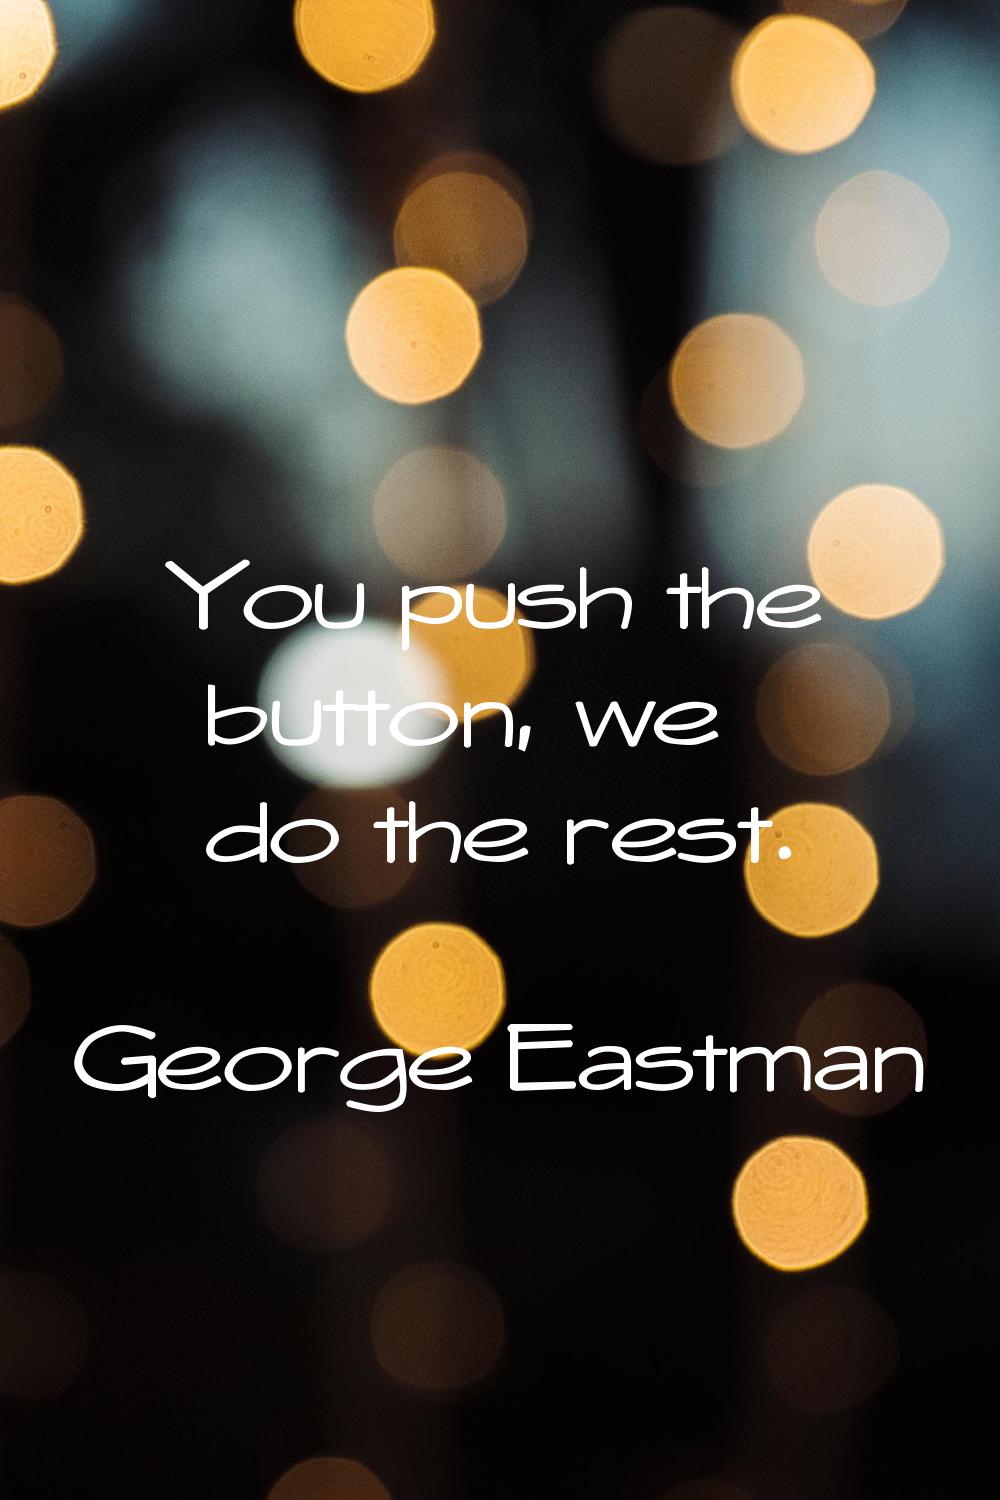 You push the button, we do the rest.